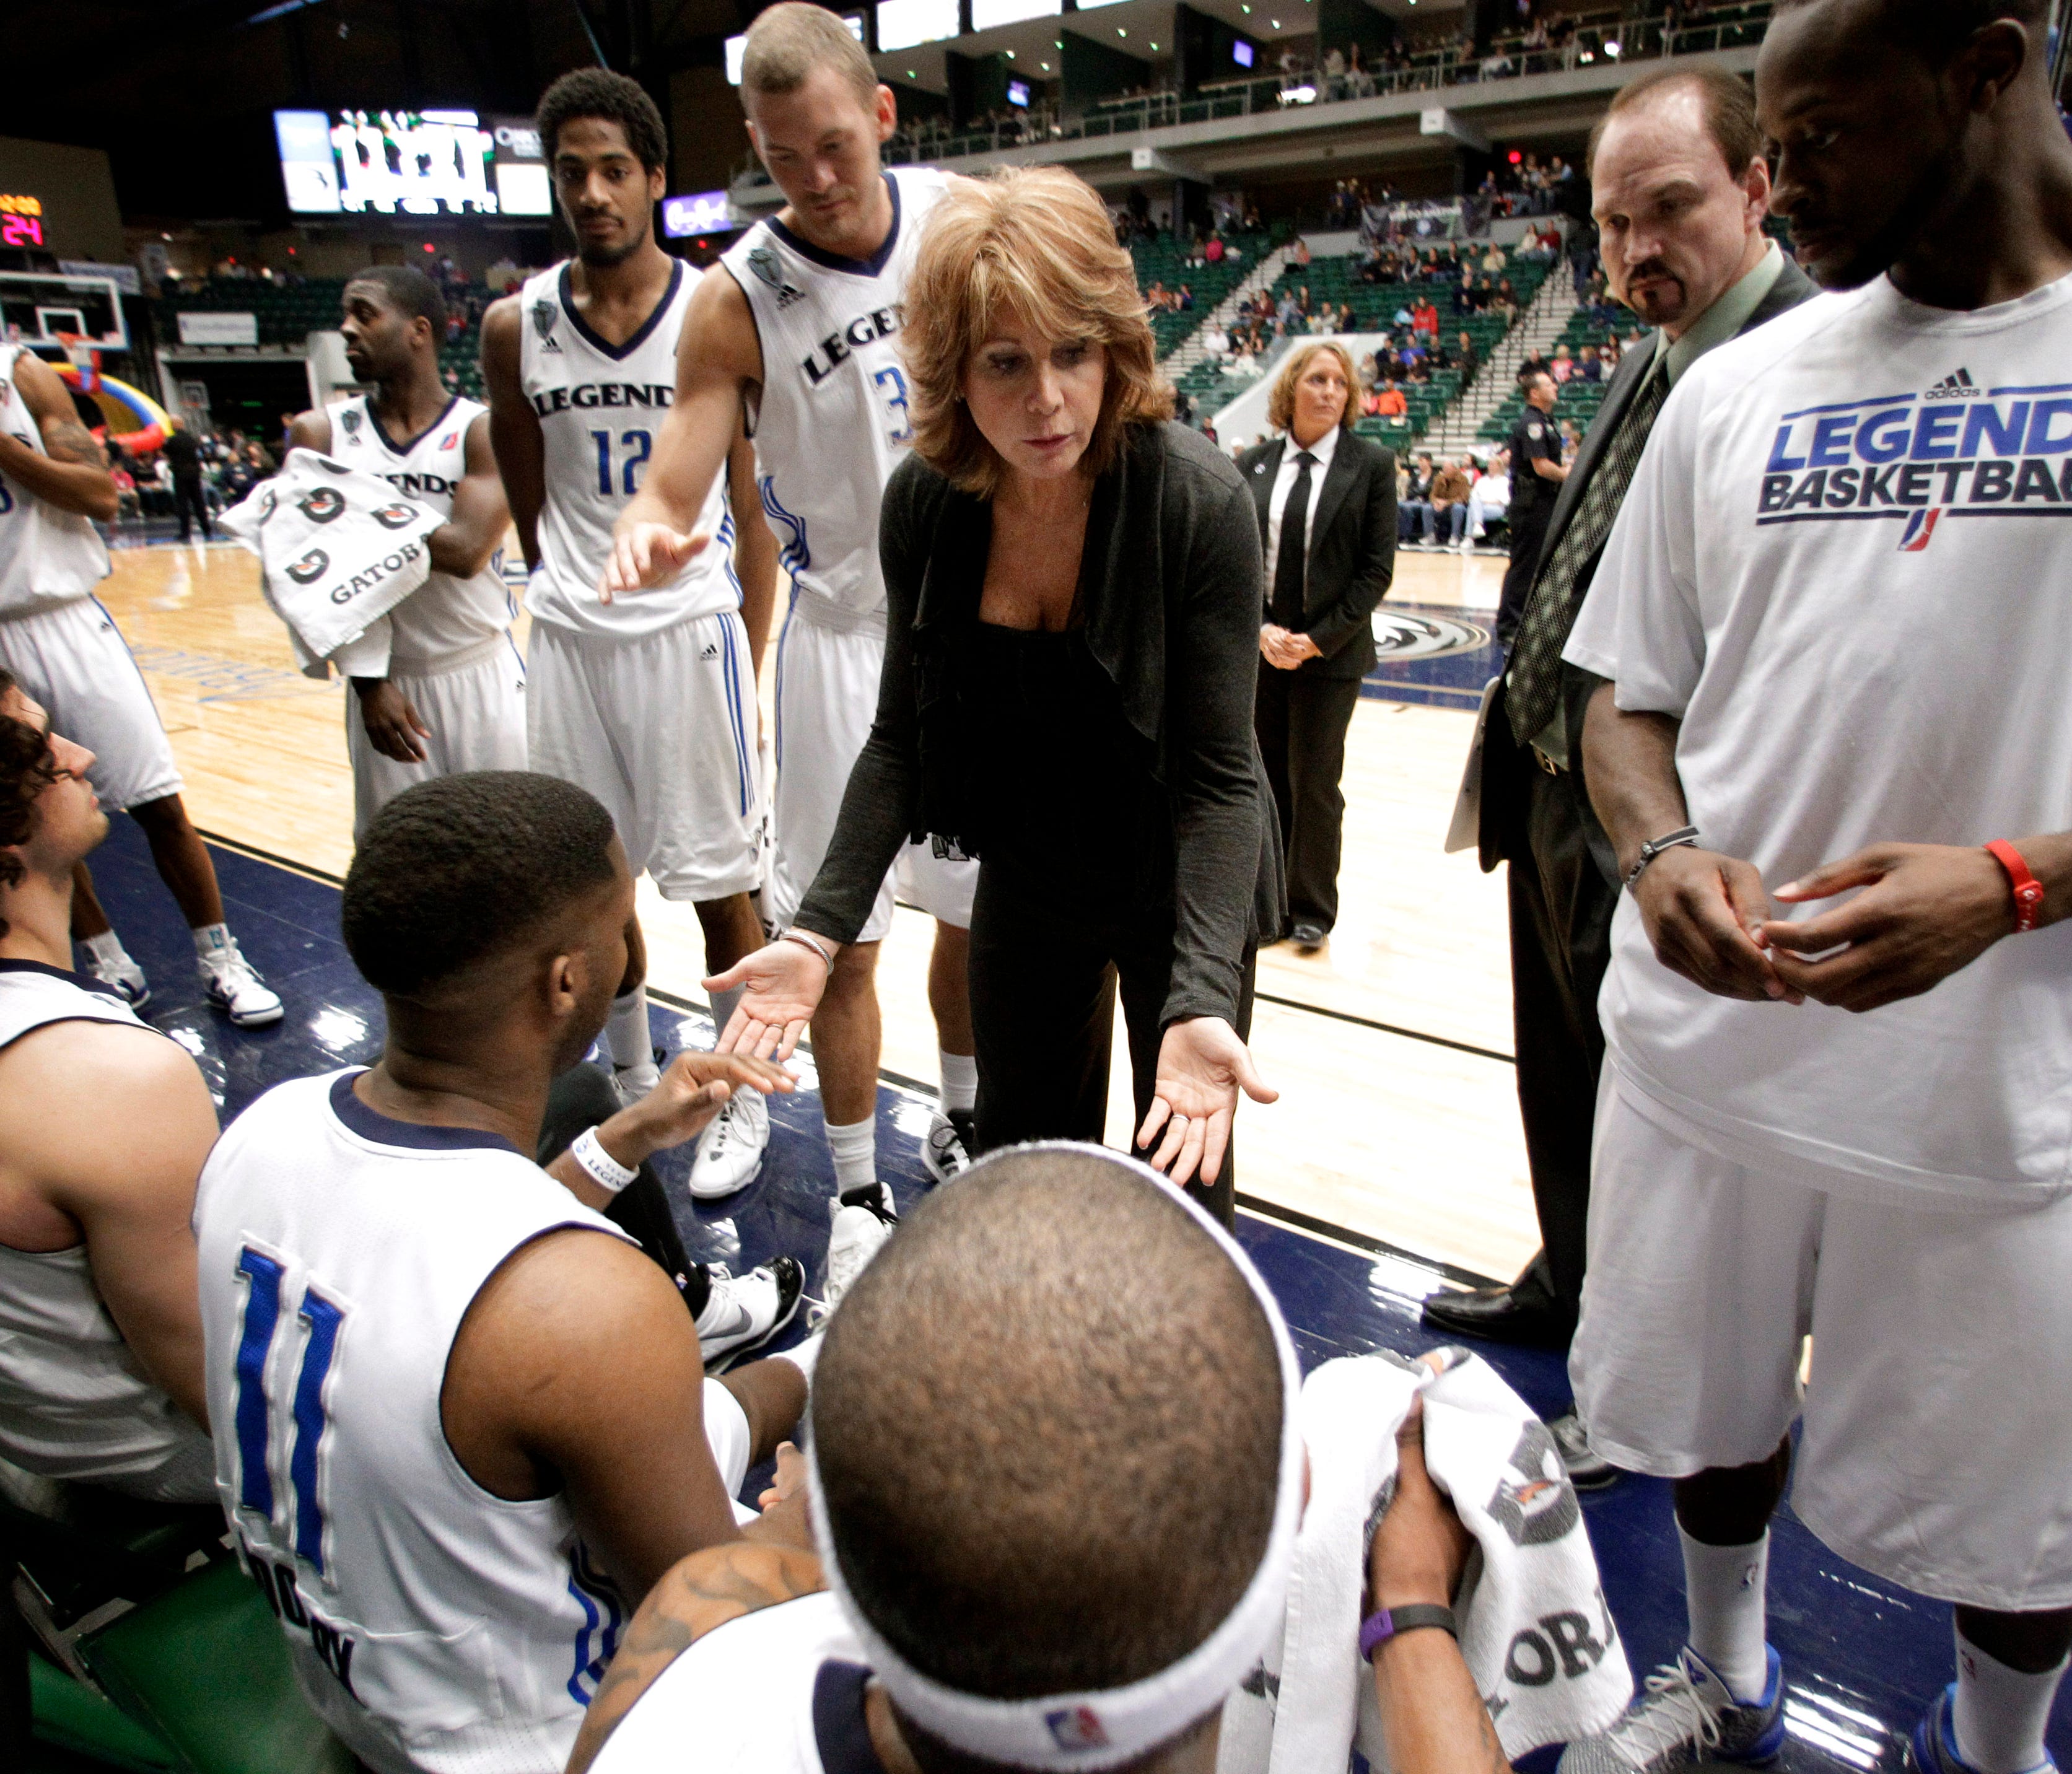 FILE - In this March 30, 2011 file photo, Texas Legends head coach Nancy Lieberman, center, leads her team during a time out in an NBA Development League basketball game against the Springfield Armor in Frisco, Texas.  A person with knowledge of the 